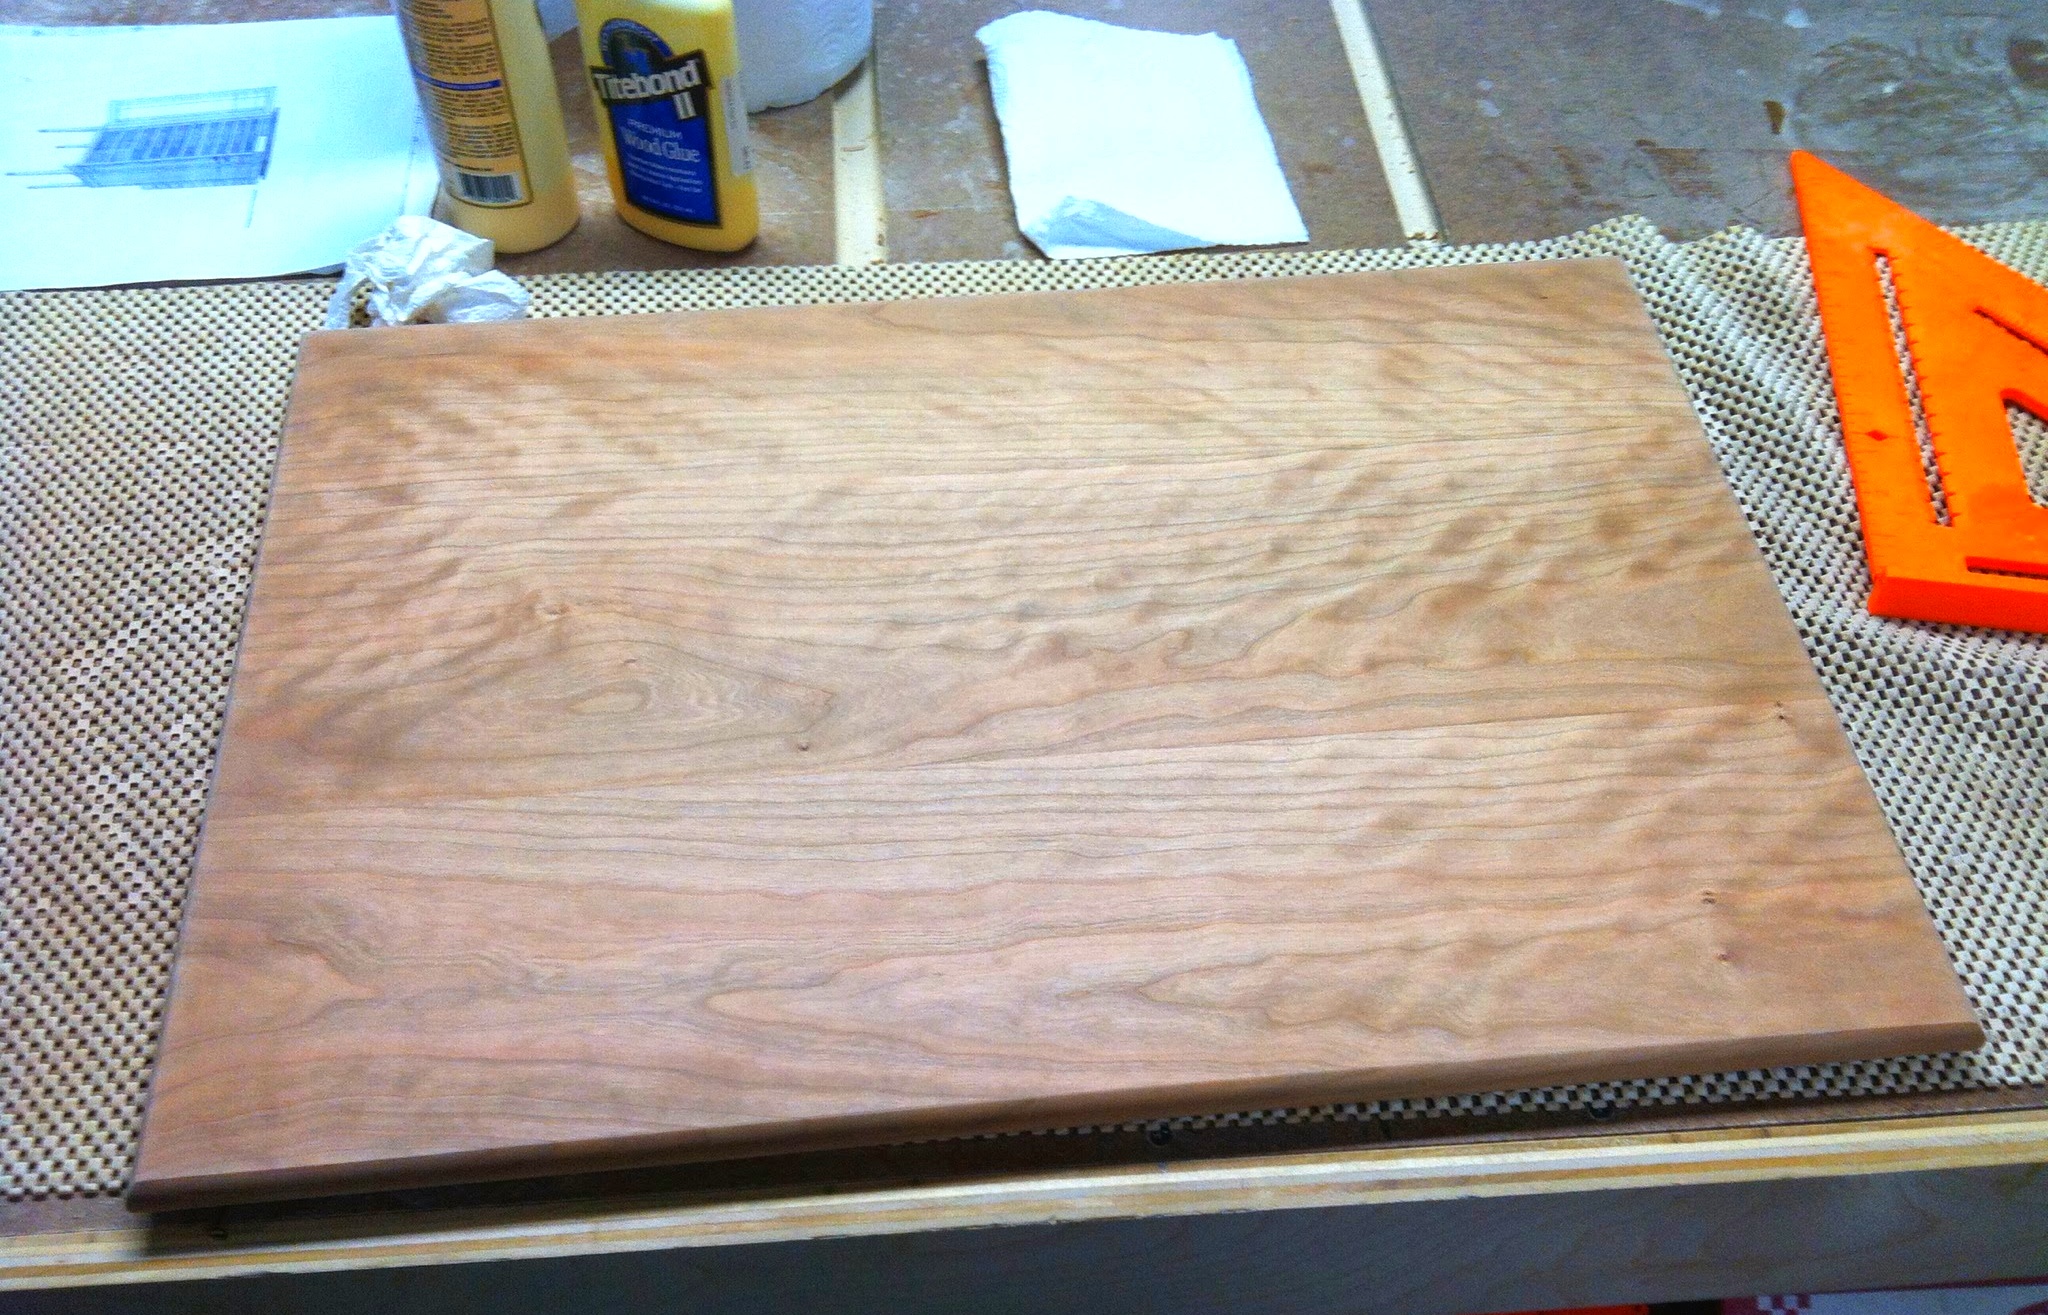 The curly cherry top of the cabinet is probably the best looking wood I've ever worked